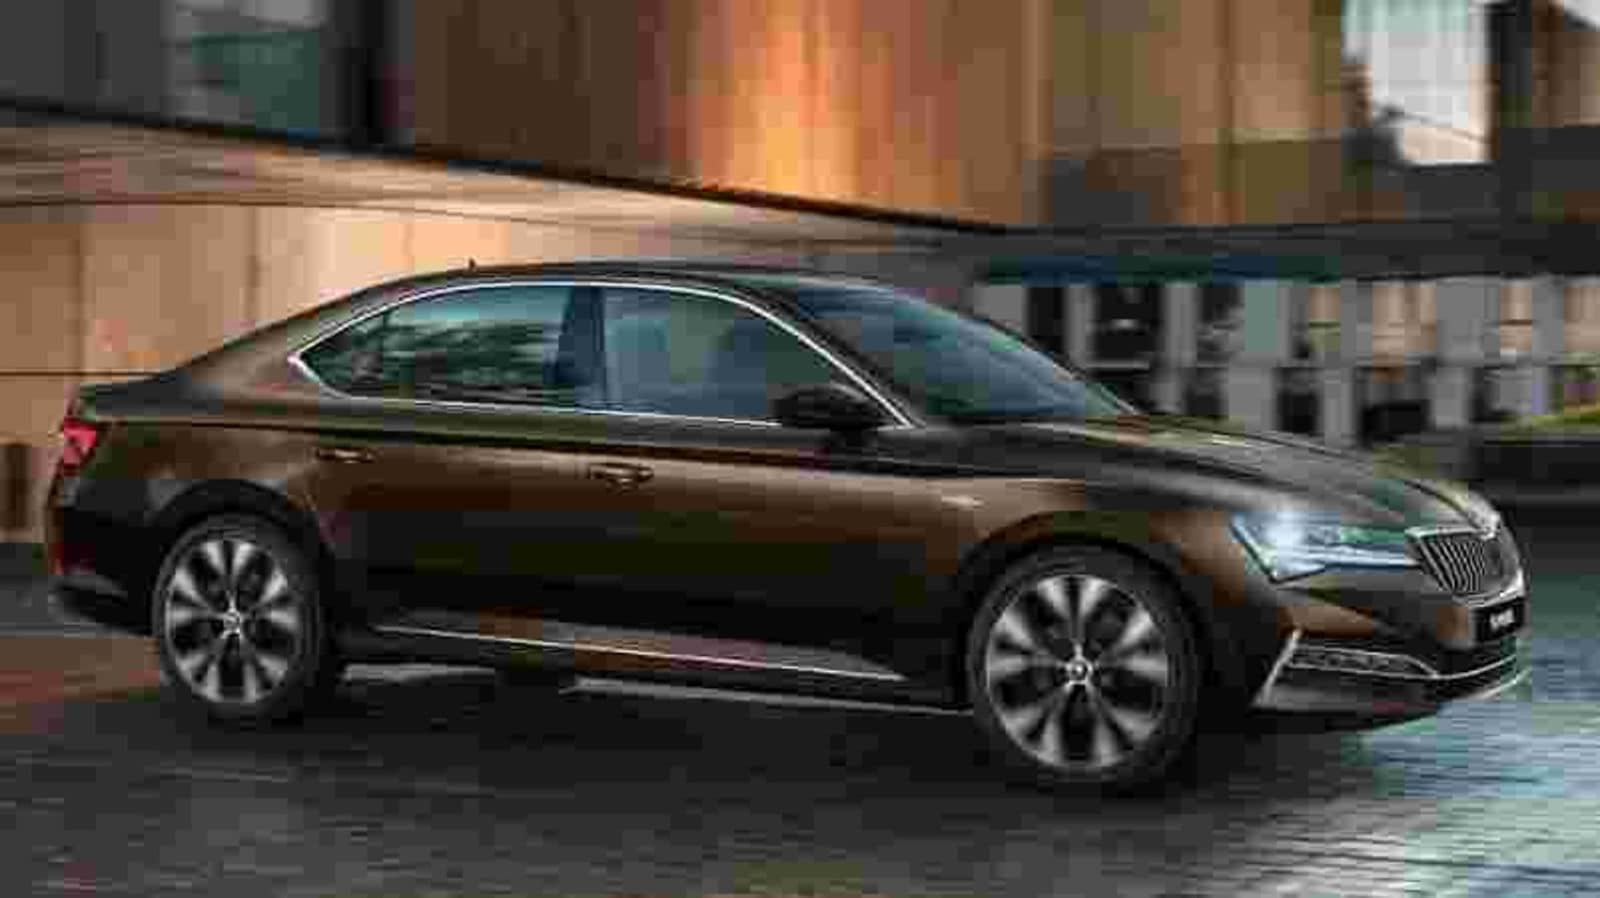 Skoda Superb price, launch details, engine, features, Camry rival